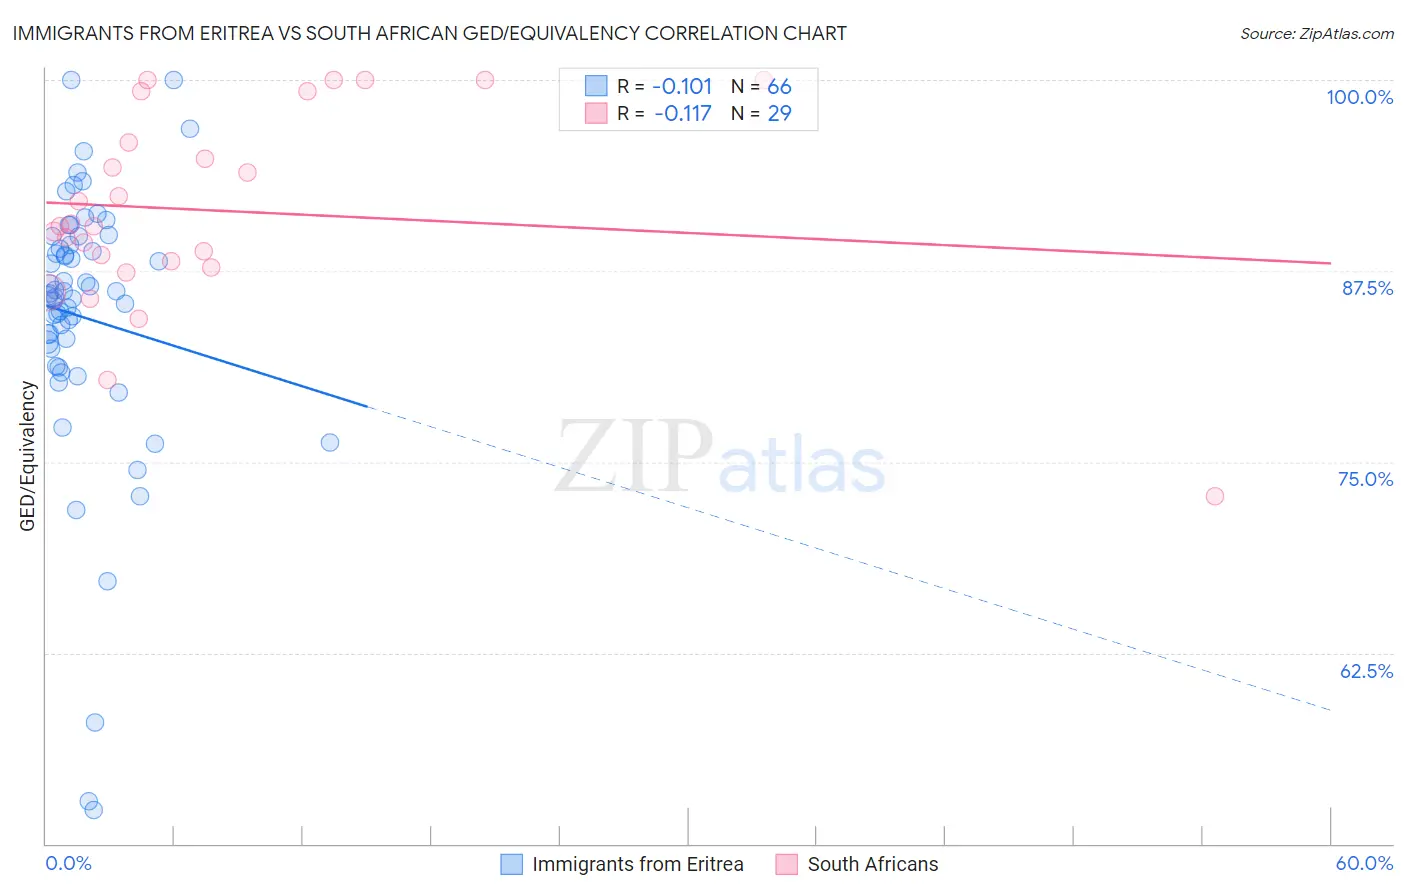 Immigrants from Eritrea vs South African GED/Equivalency